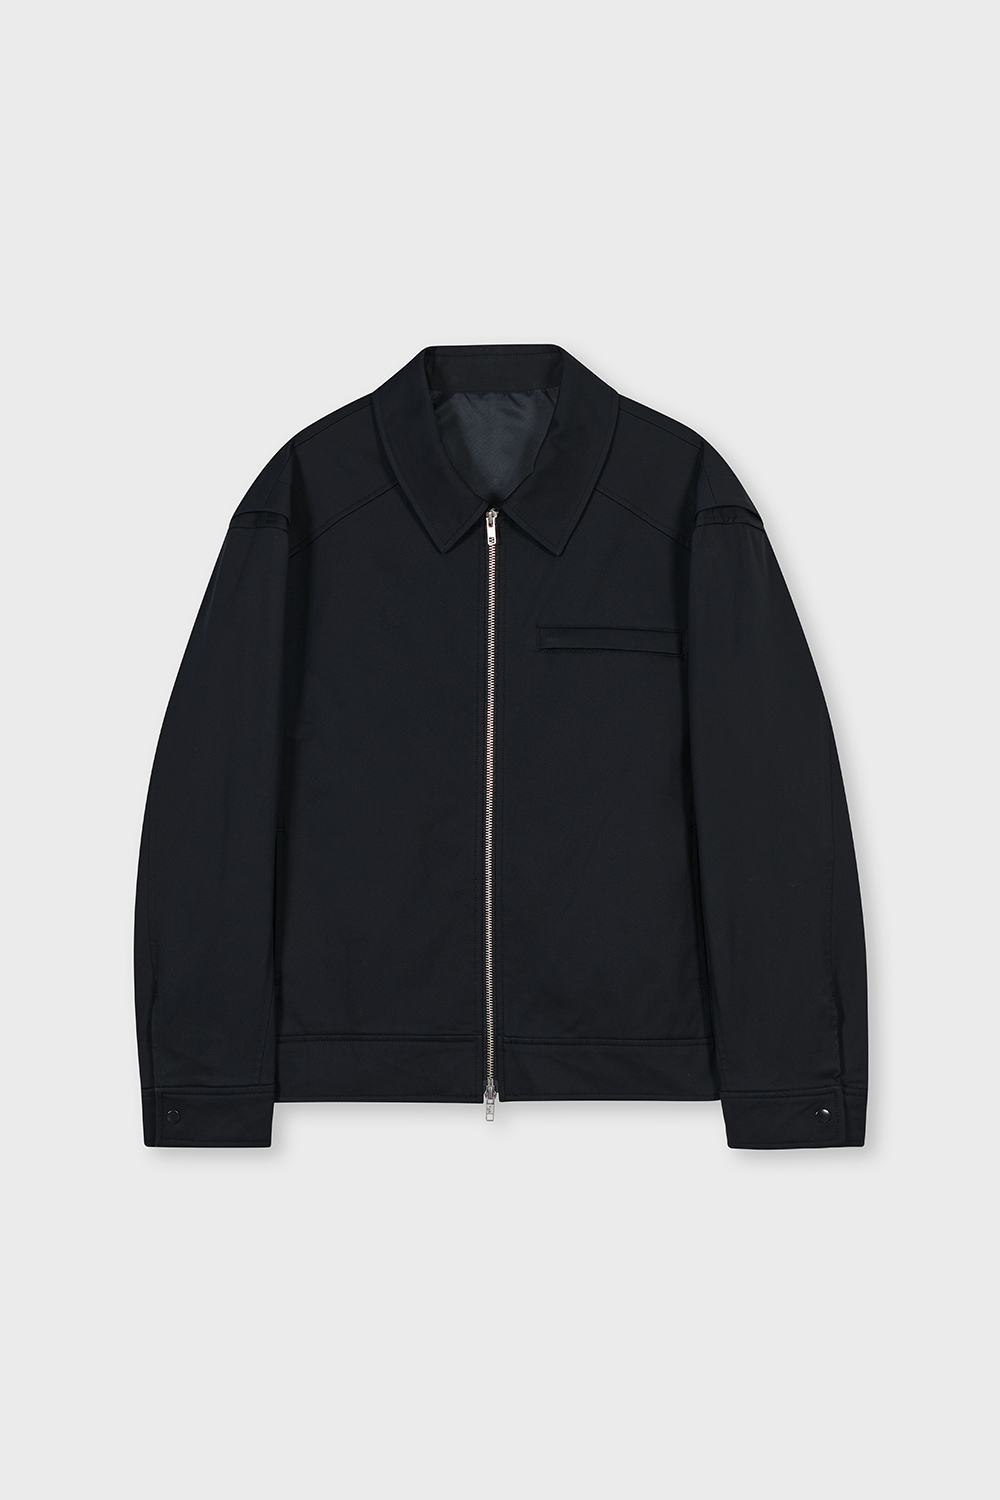 HILLS Cover Jacket (Navy)